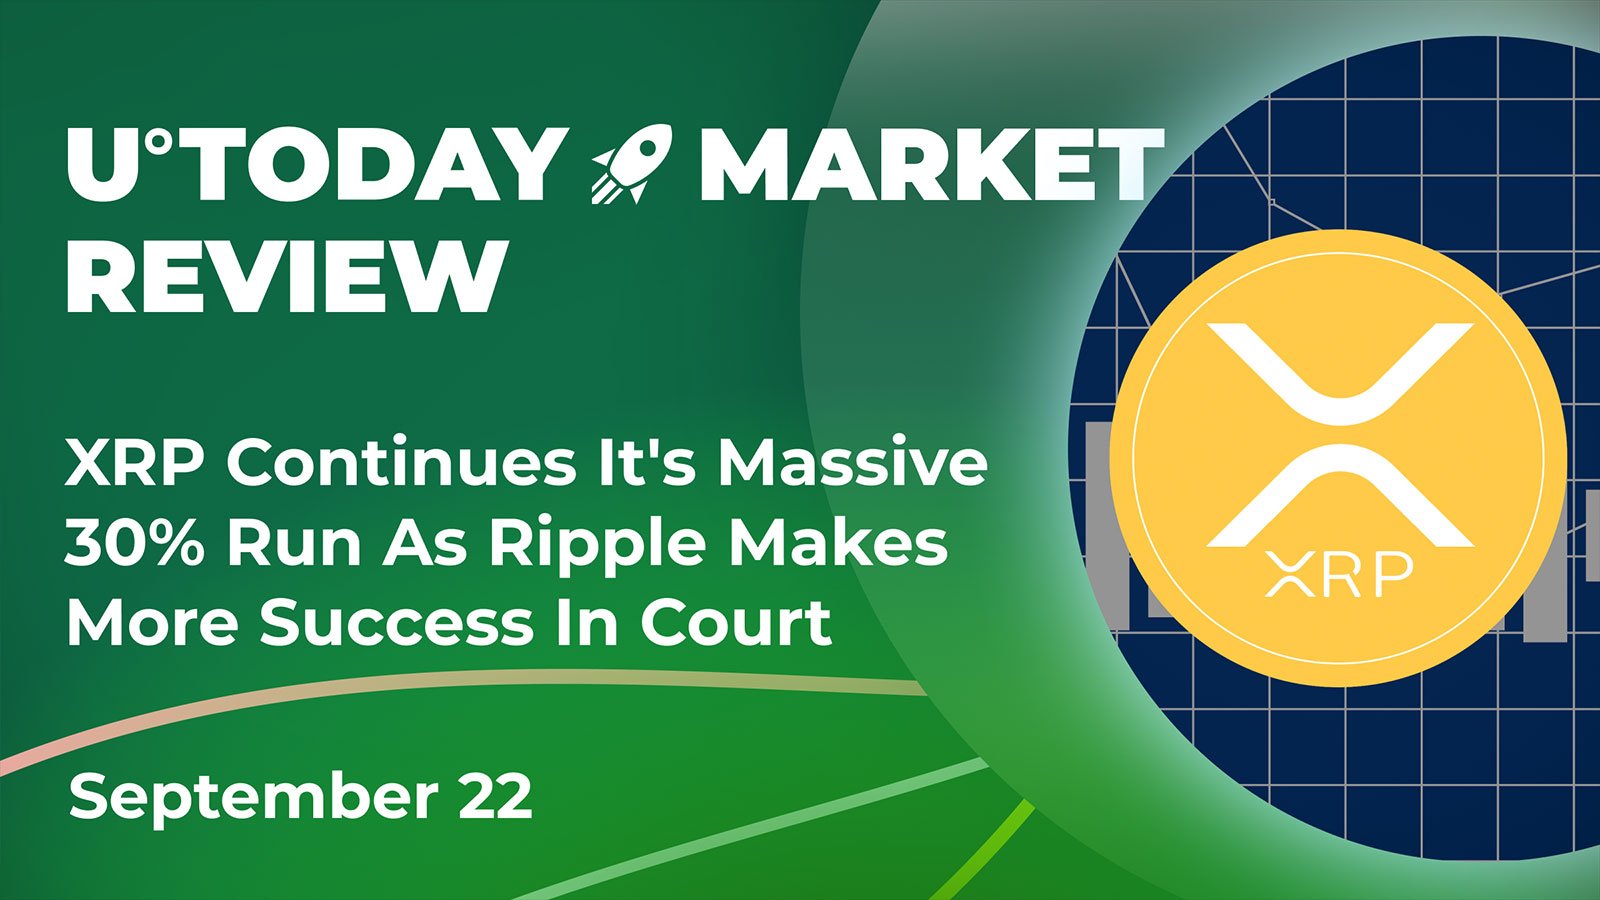 XRP Continues Its Massive 30% Run As Ripple Makes More Success In Court:Crypto Market Review, September 22